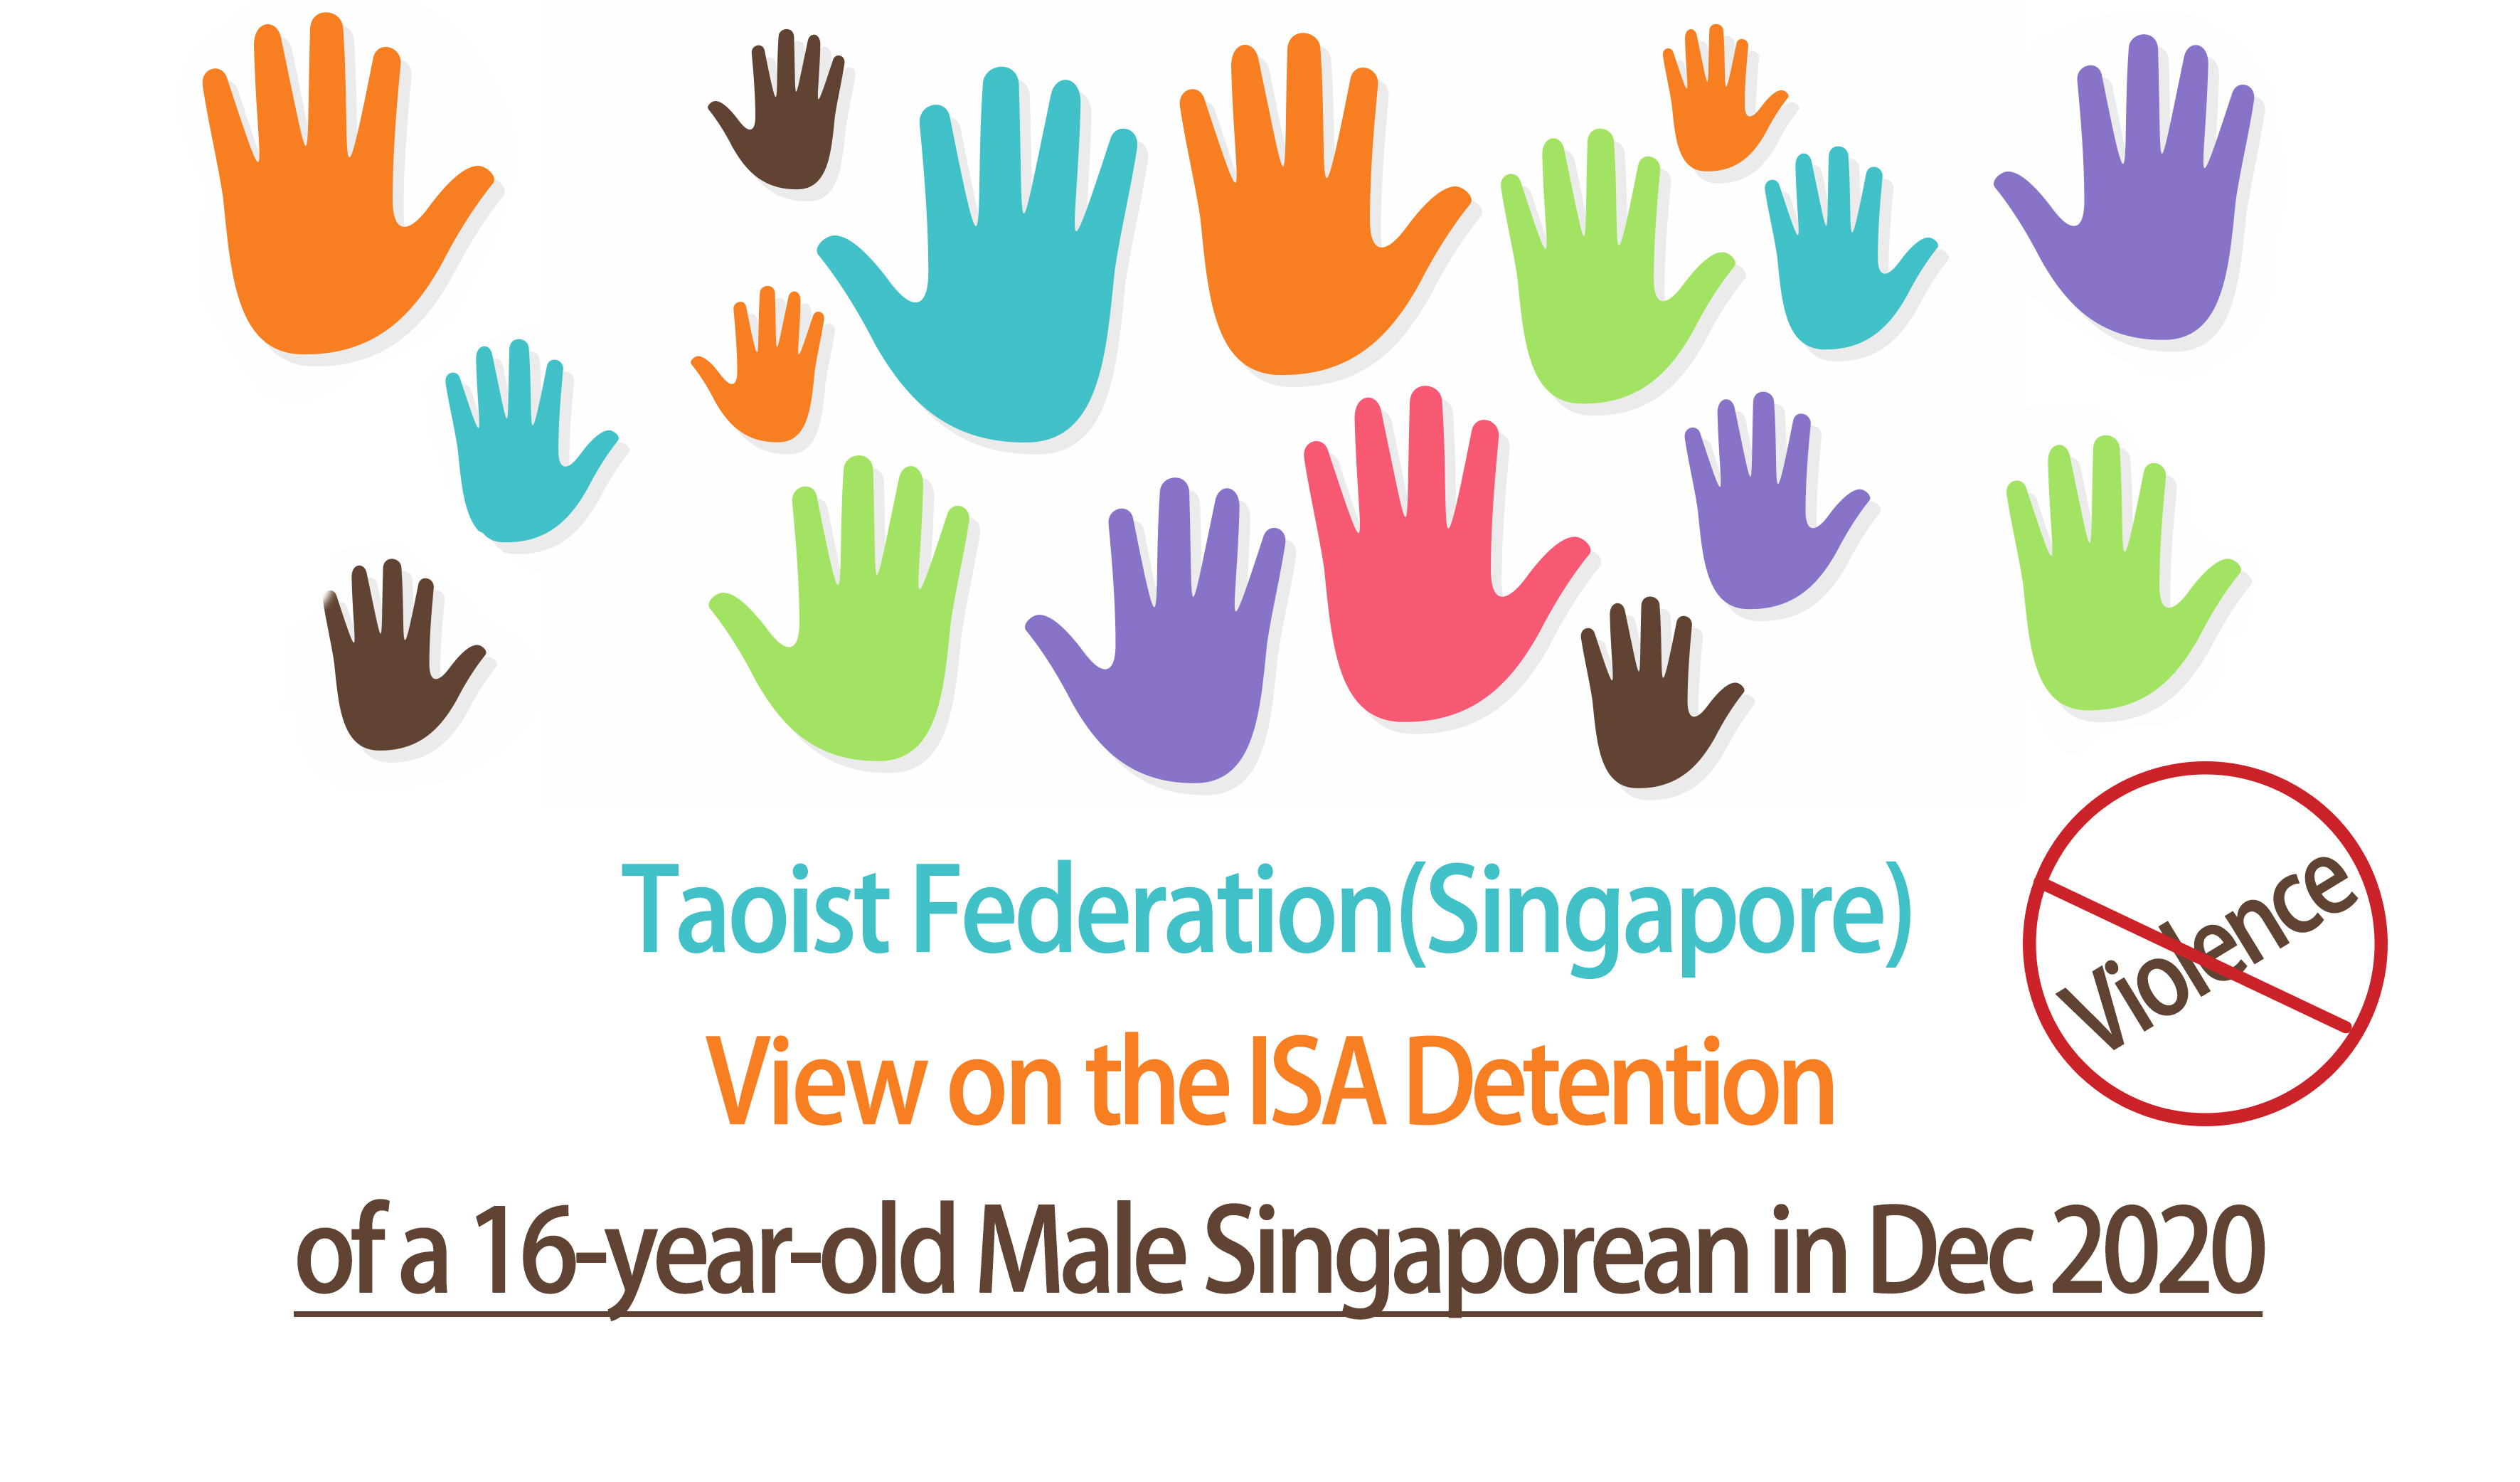 Taoist Federation(Singapore) View on the ISA Detention of a 16-year-old Male Singaporean in Dec 2020